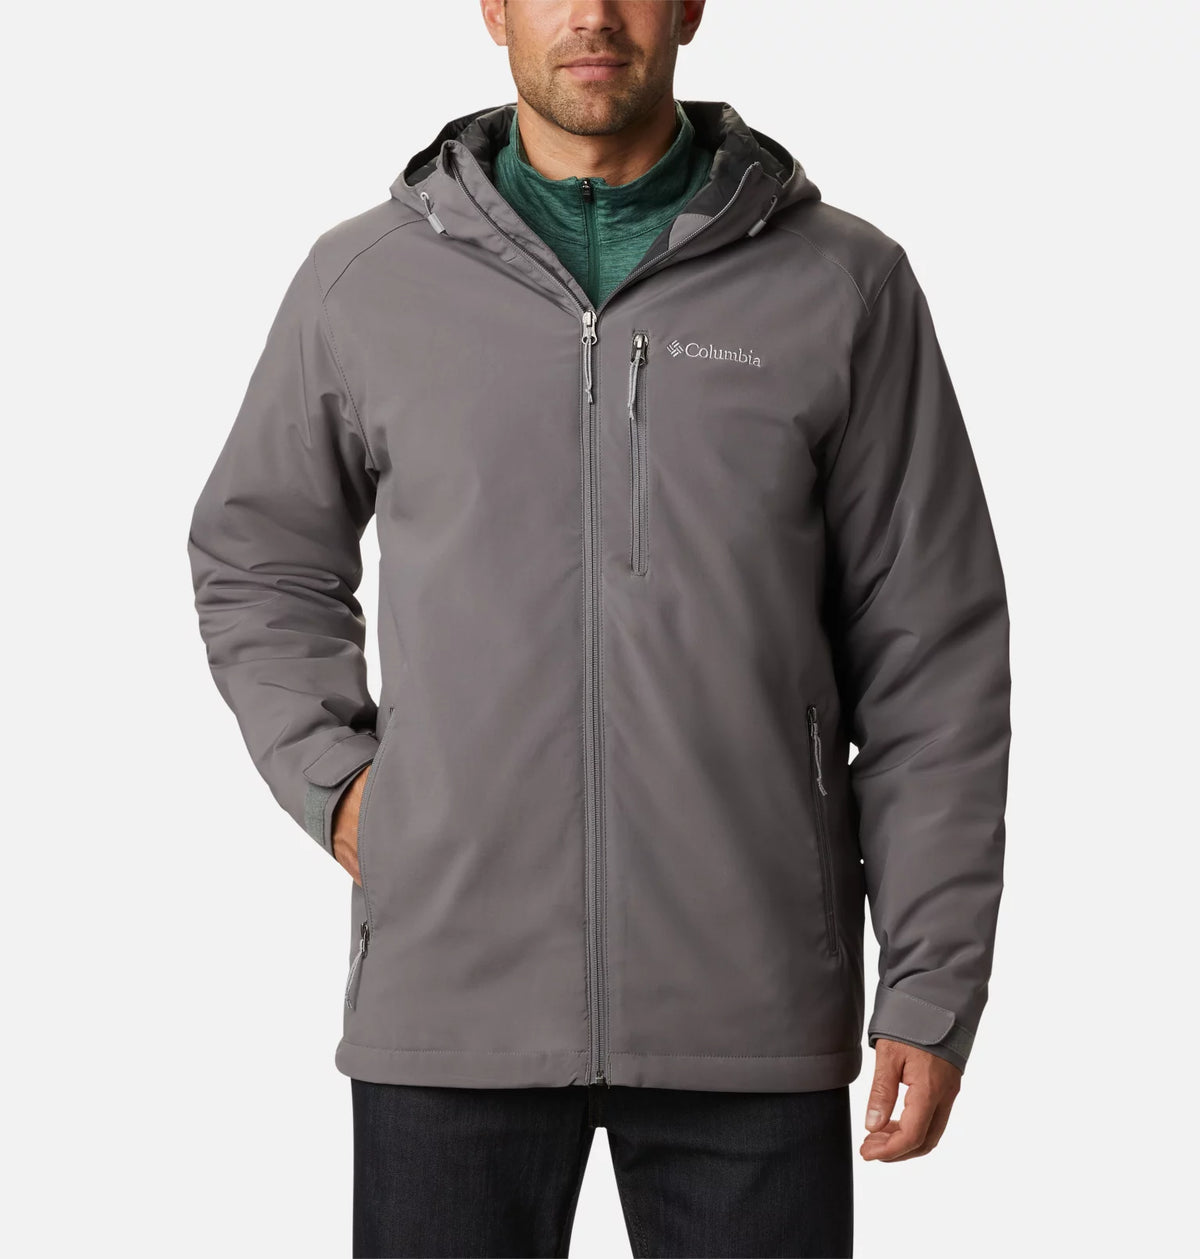 Gate Racer Soft Shell Columbia